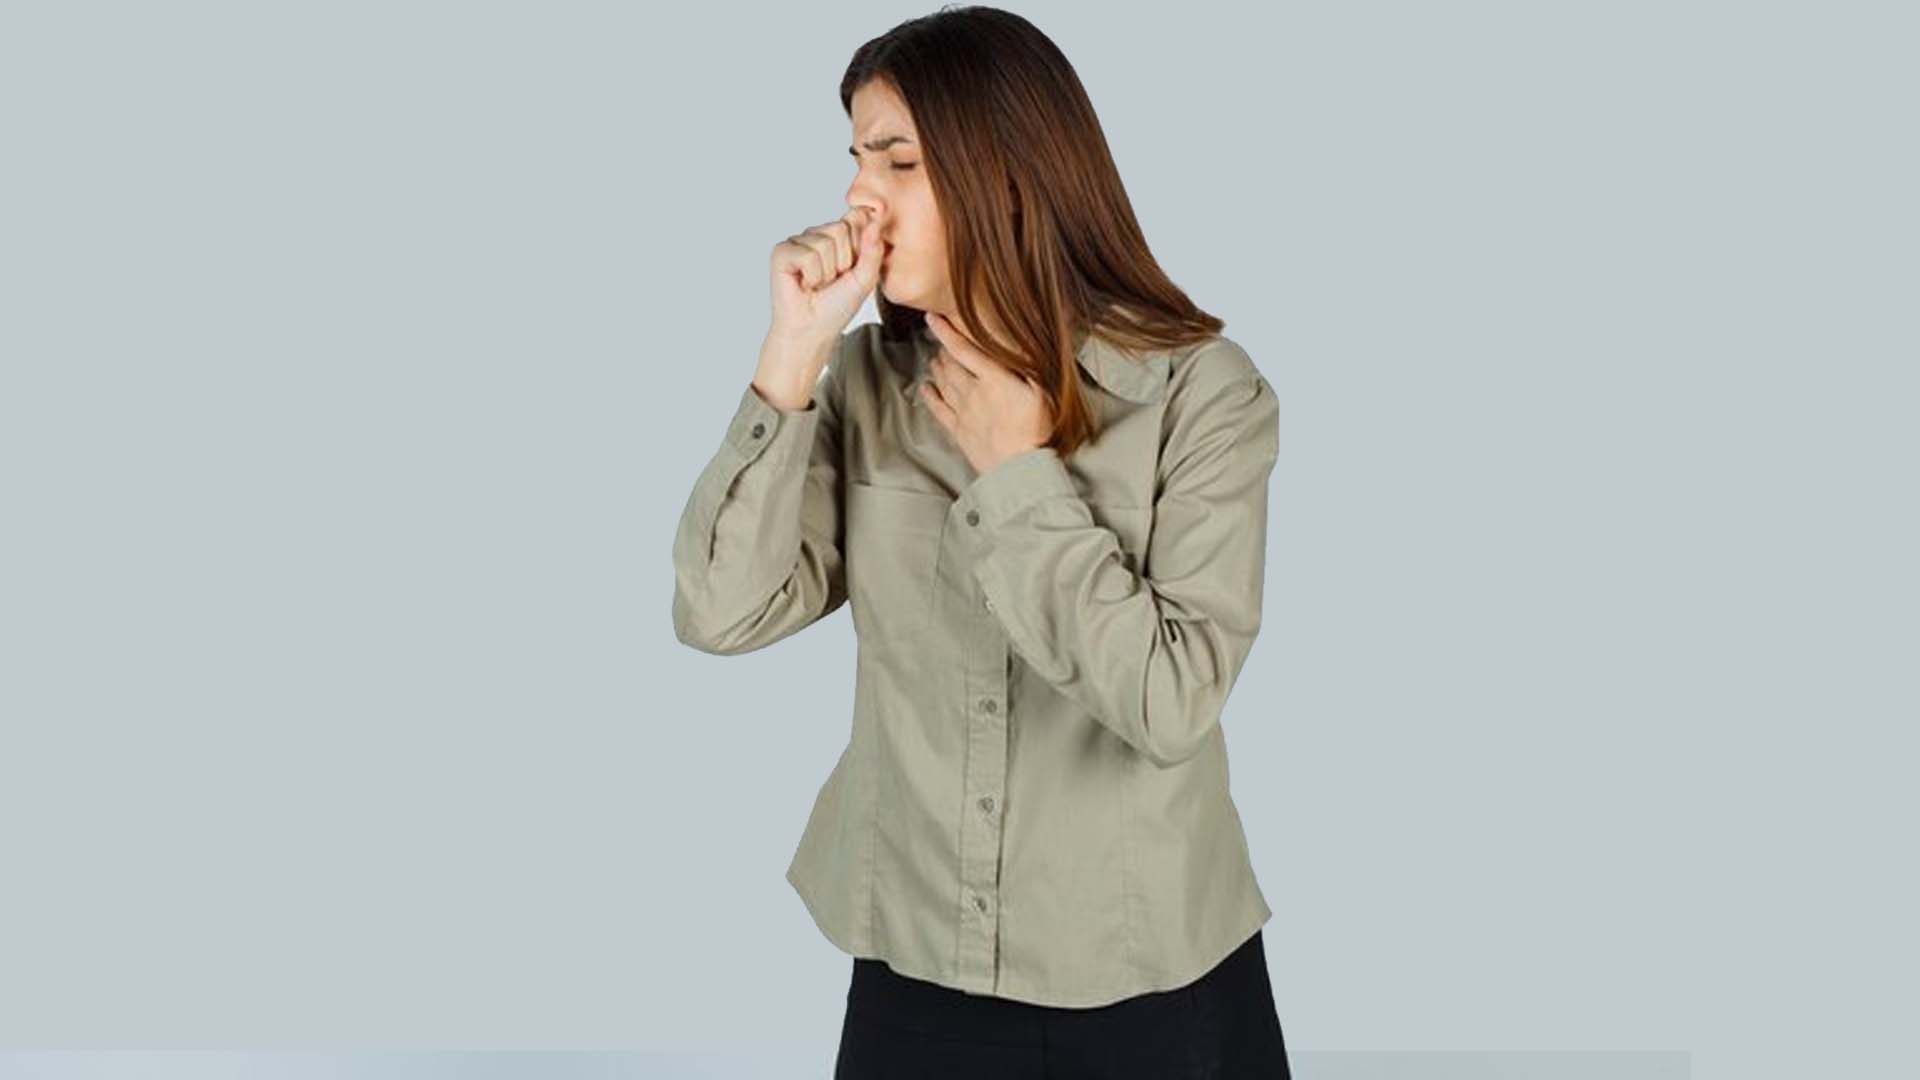 Women Wearing Shirt Coughing by holding Neck